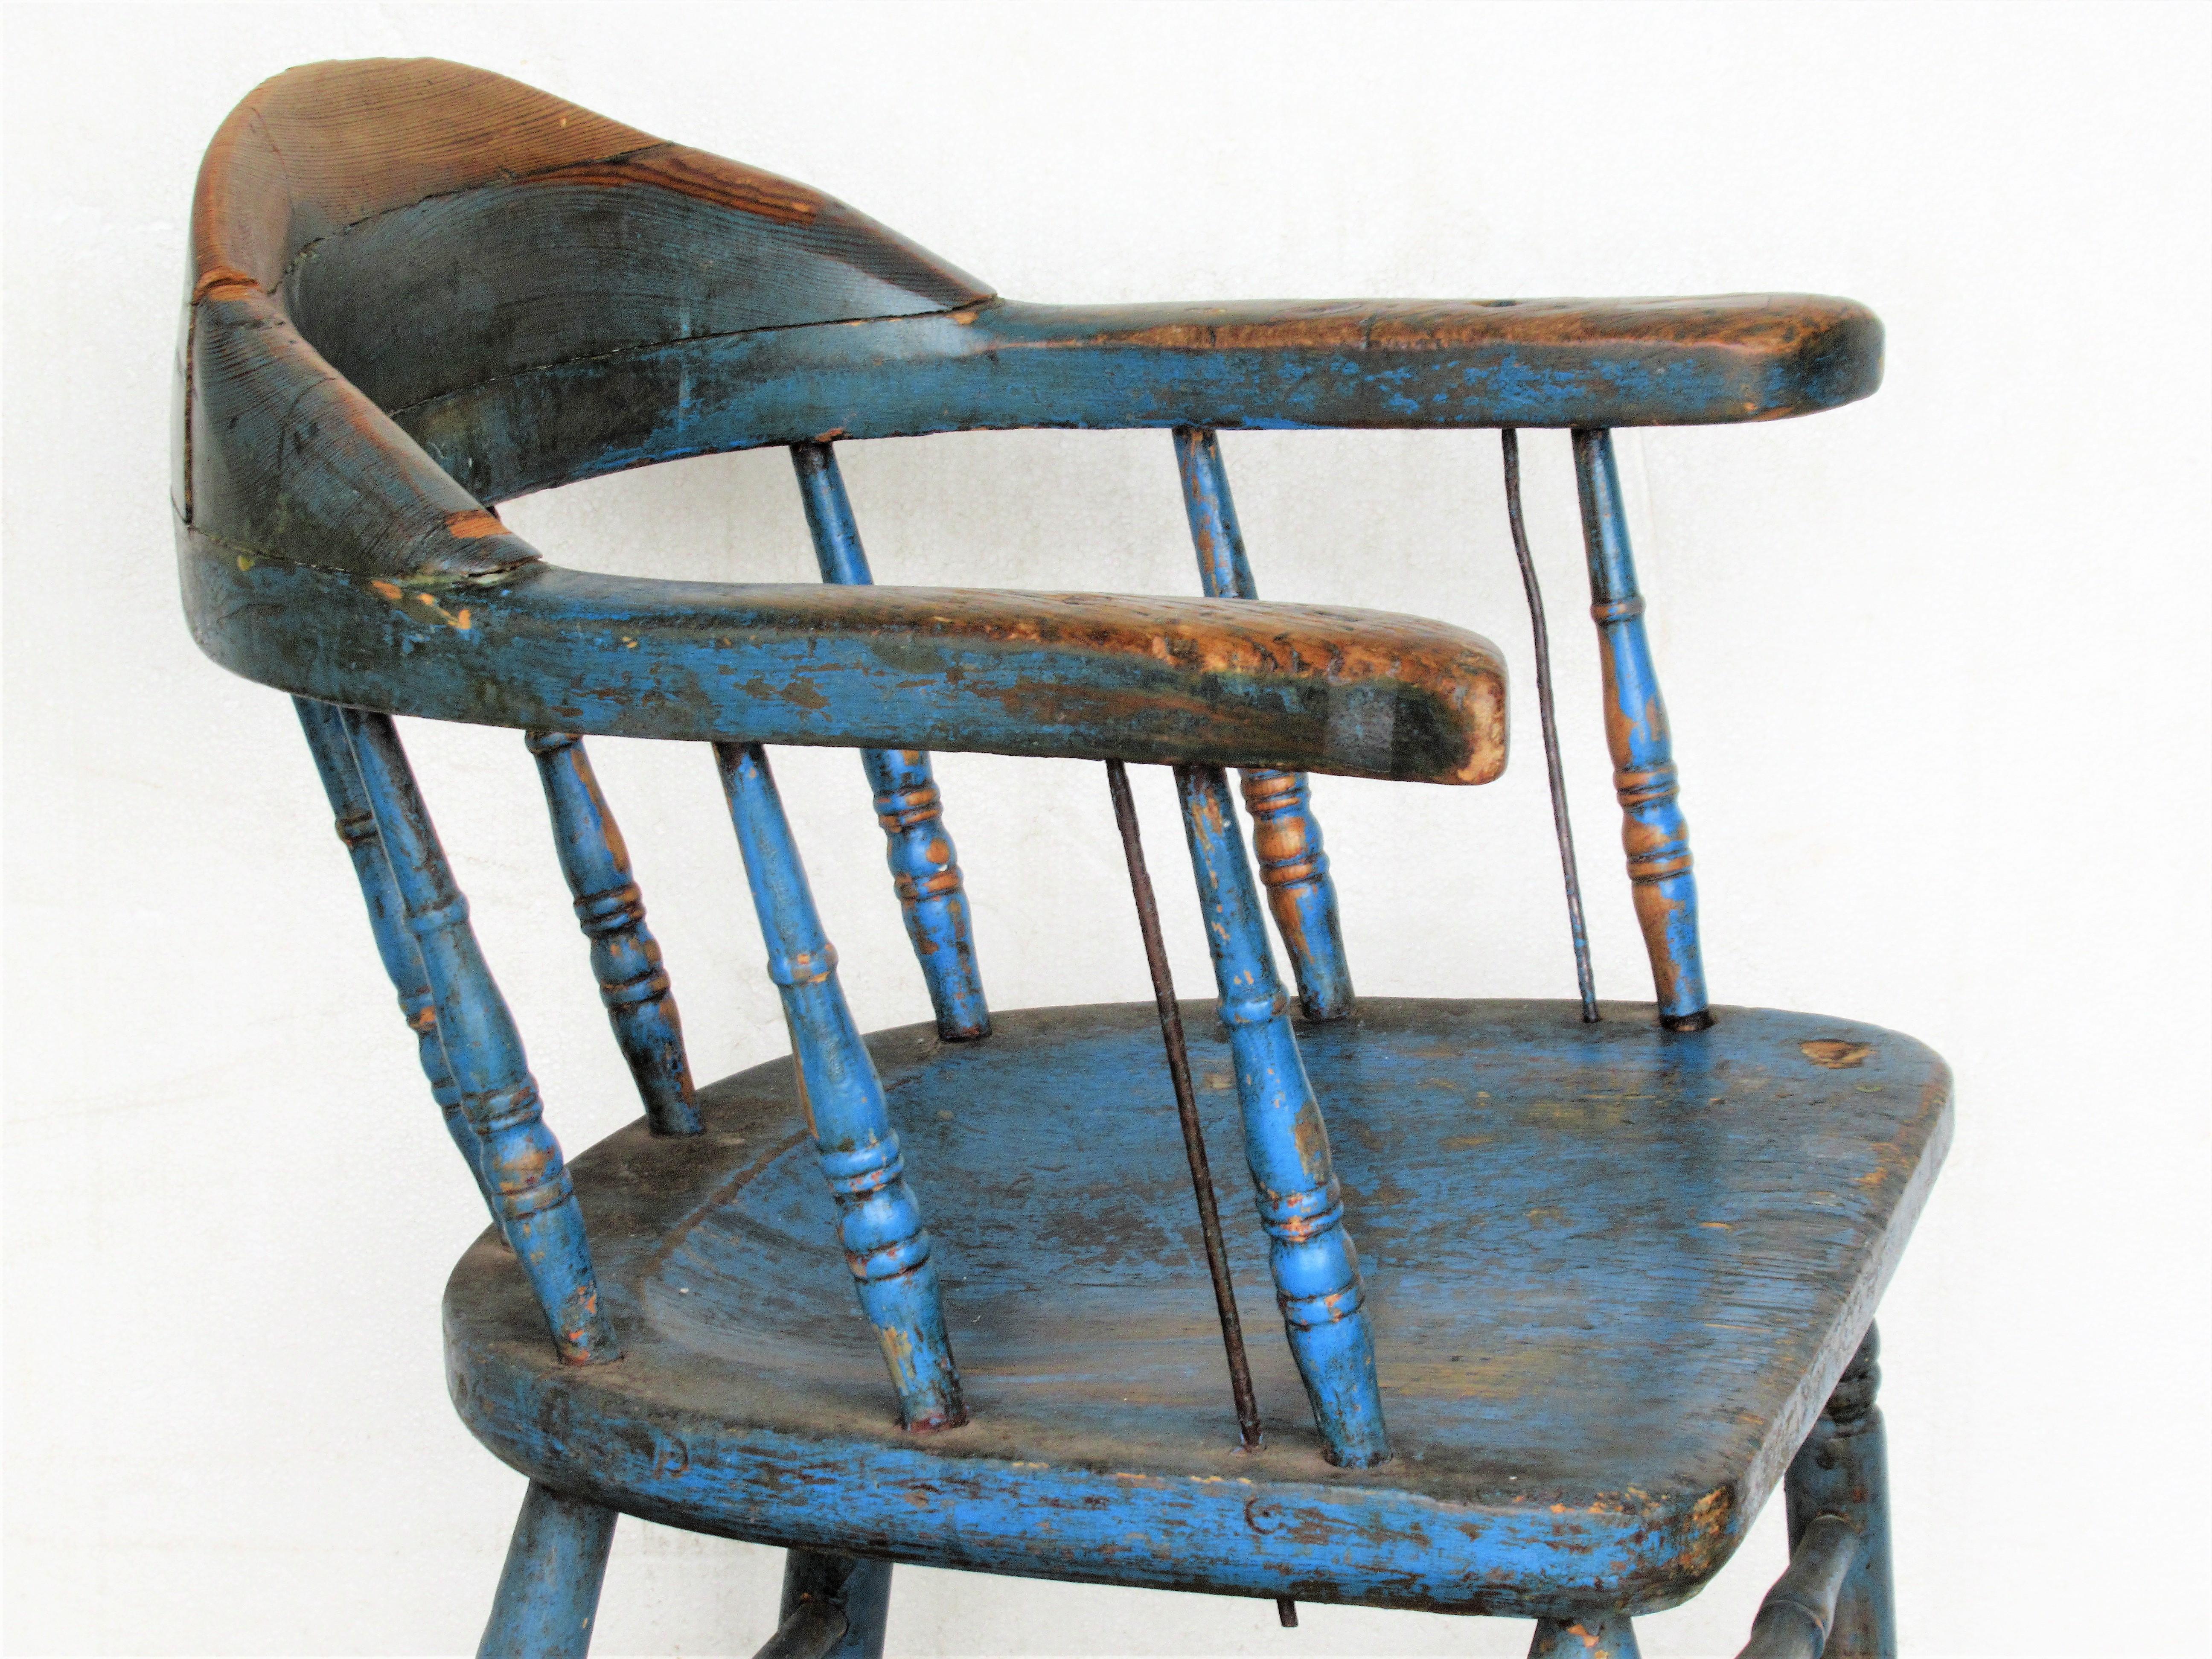 Antique American firehouse Windsor chair in beautiful old worn blue painted surface. New England, circa 1890. Look at all pictures and read condition report in comment section.